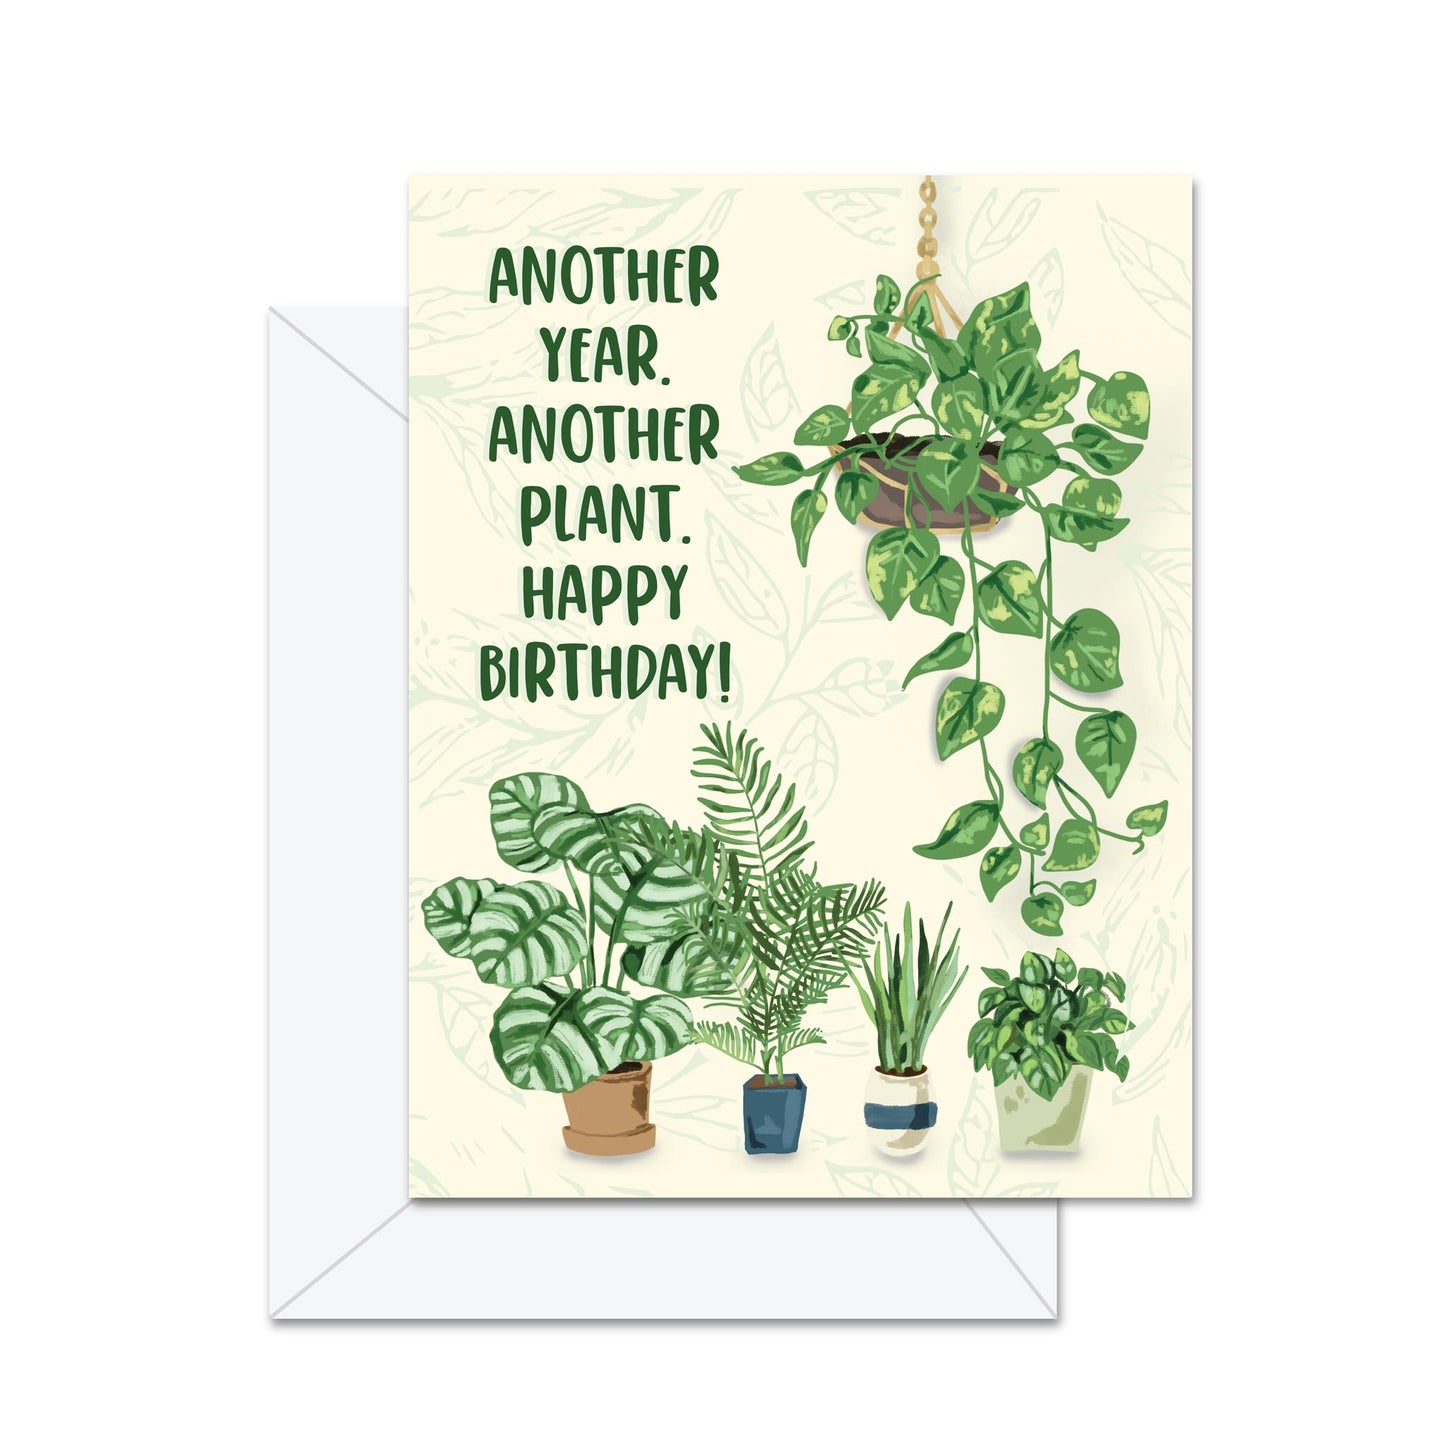 Another Year. Another Plant. Happy Birthday! - Greeting Card